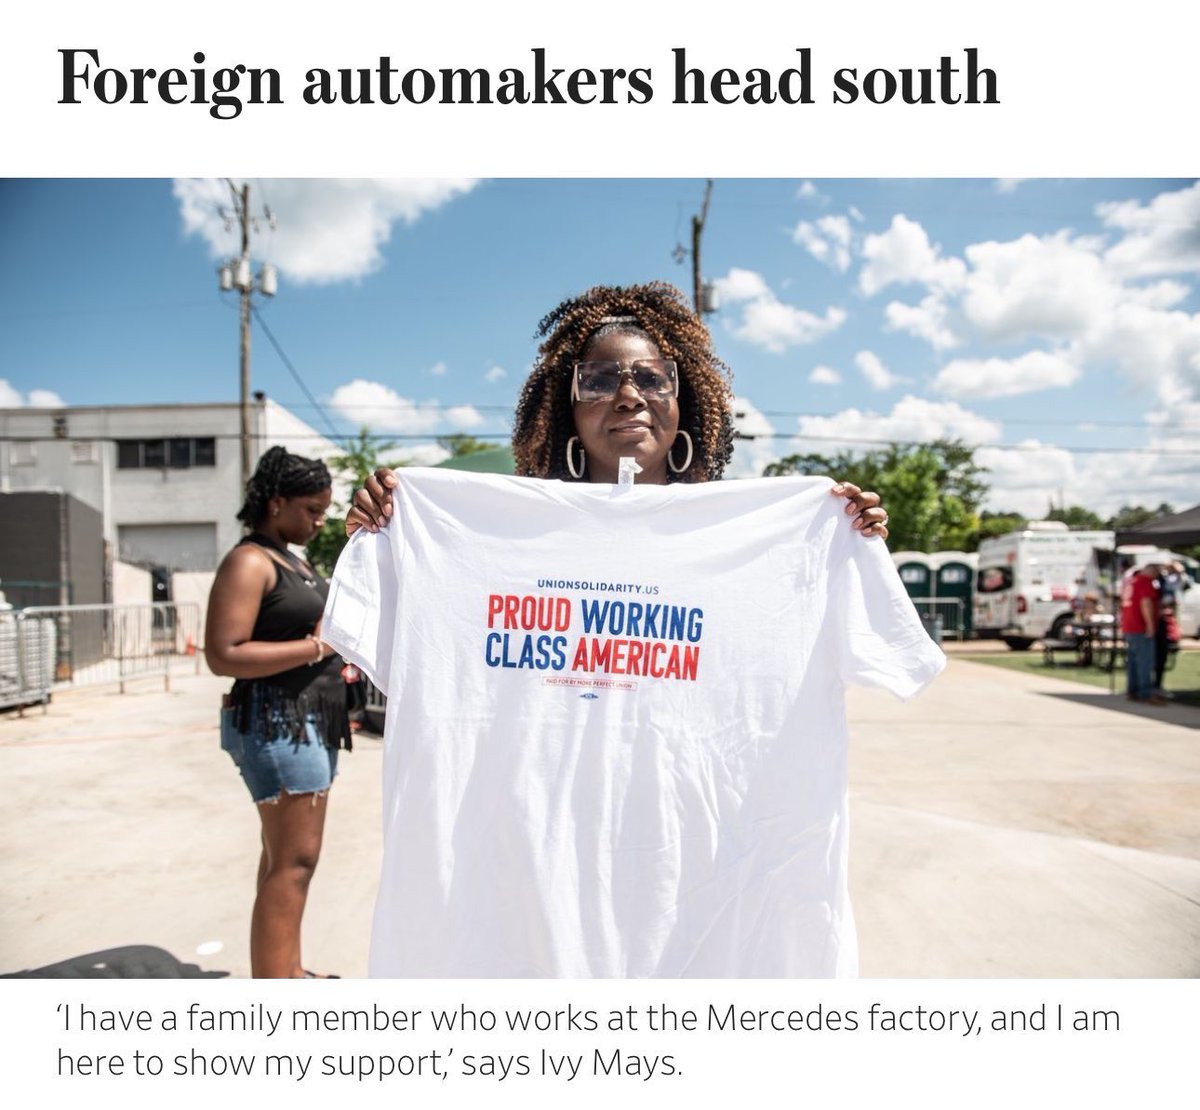 Mercedes is getting nervous. It understands that union workers make better wages and benefits than non-union workers. That's why Mercedes is engaged in a union busting campaign in Alabama despite claiming to be 'neutral.' That’s why Mercedes workers need a union.